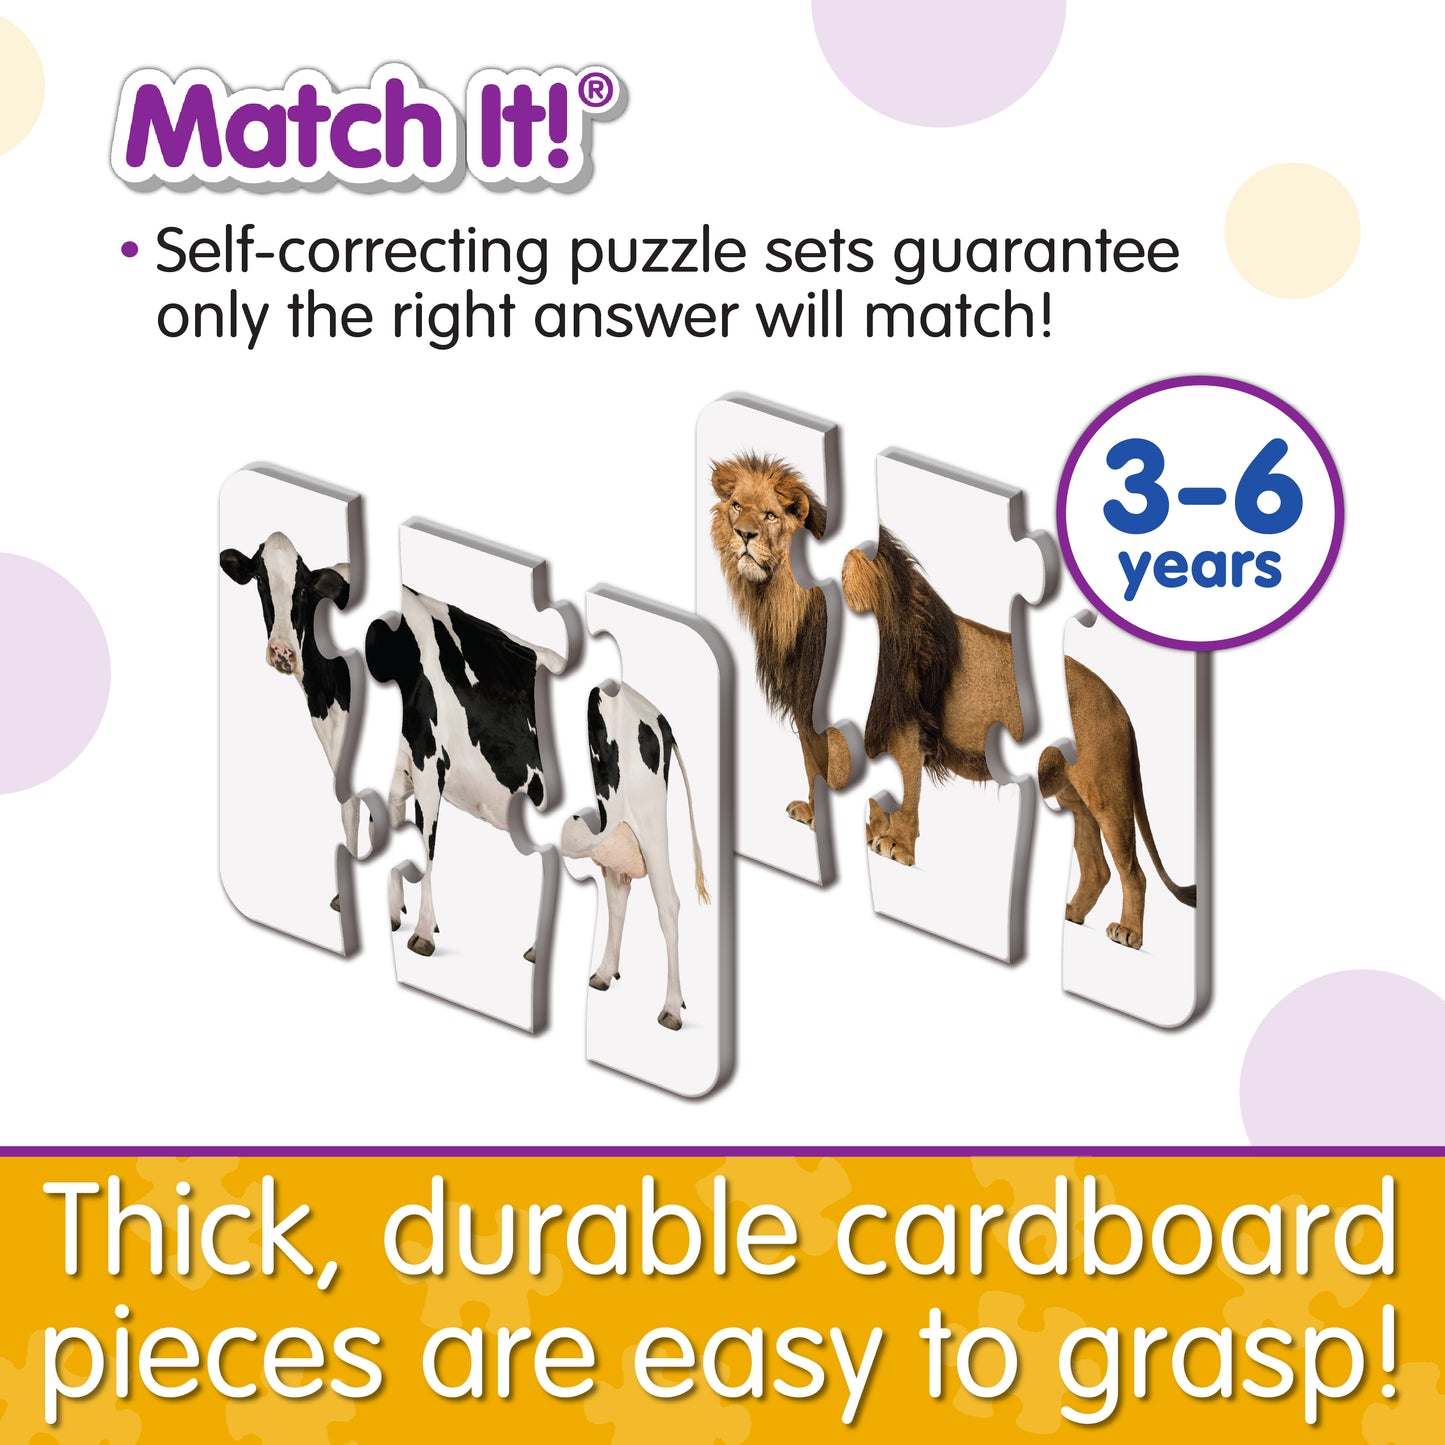 Infographic about Match It - Head to Tail's features that says, "Thick, durable cardboard pieces are easy to grasp!"